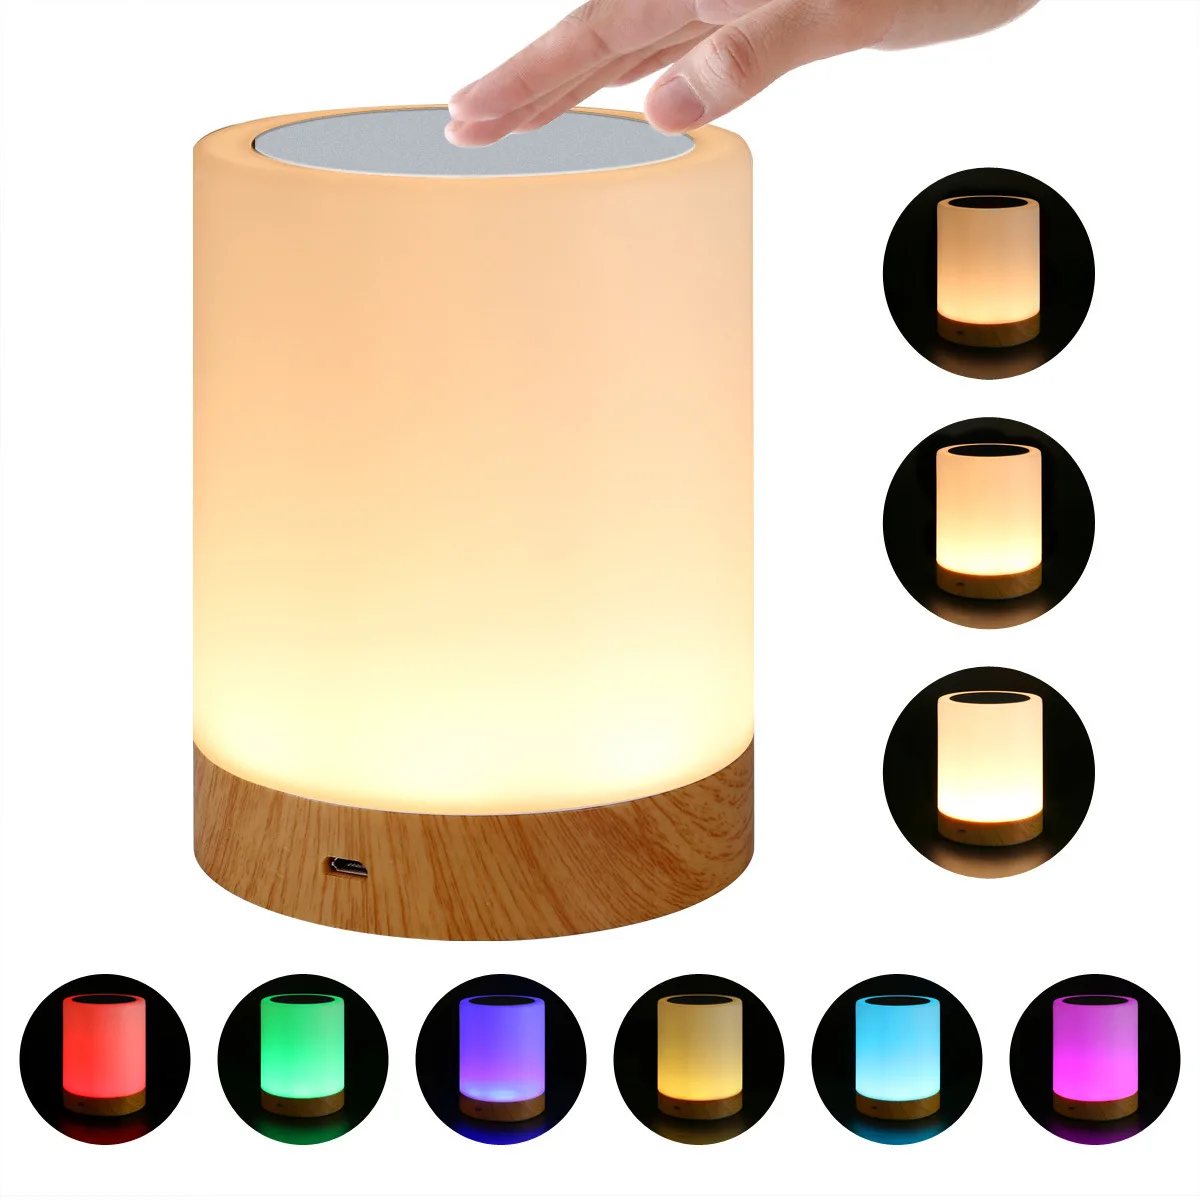 

New LED Seven-color Creative Wood Grain Rechargeable Night Lamp Gift Bedside Lamp Table Lamp Touch Clapping Atmosphere Lamp